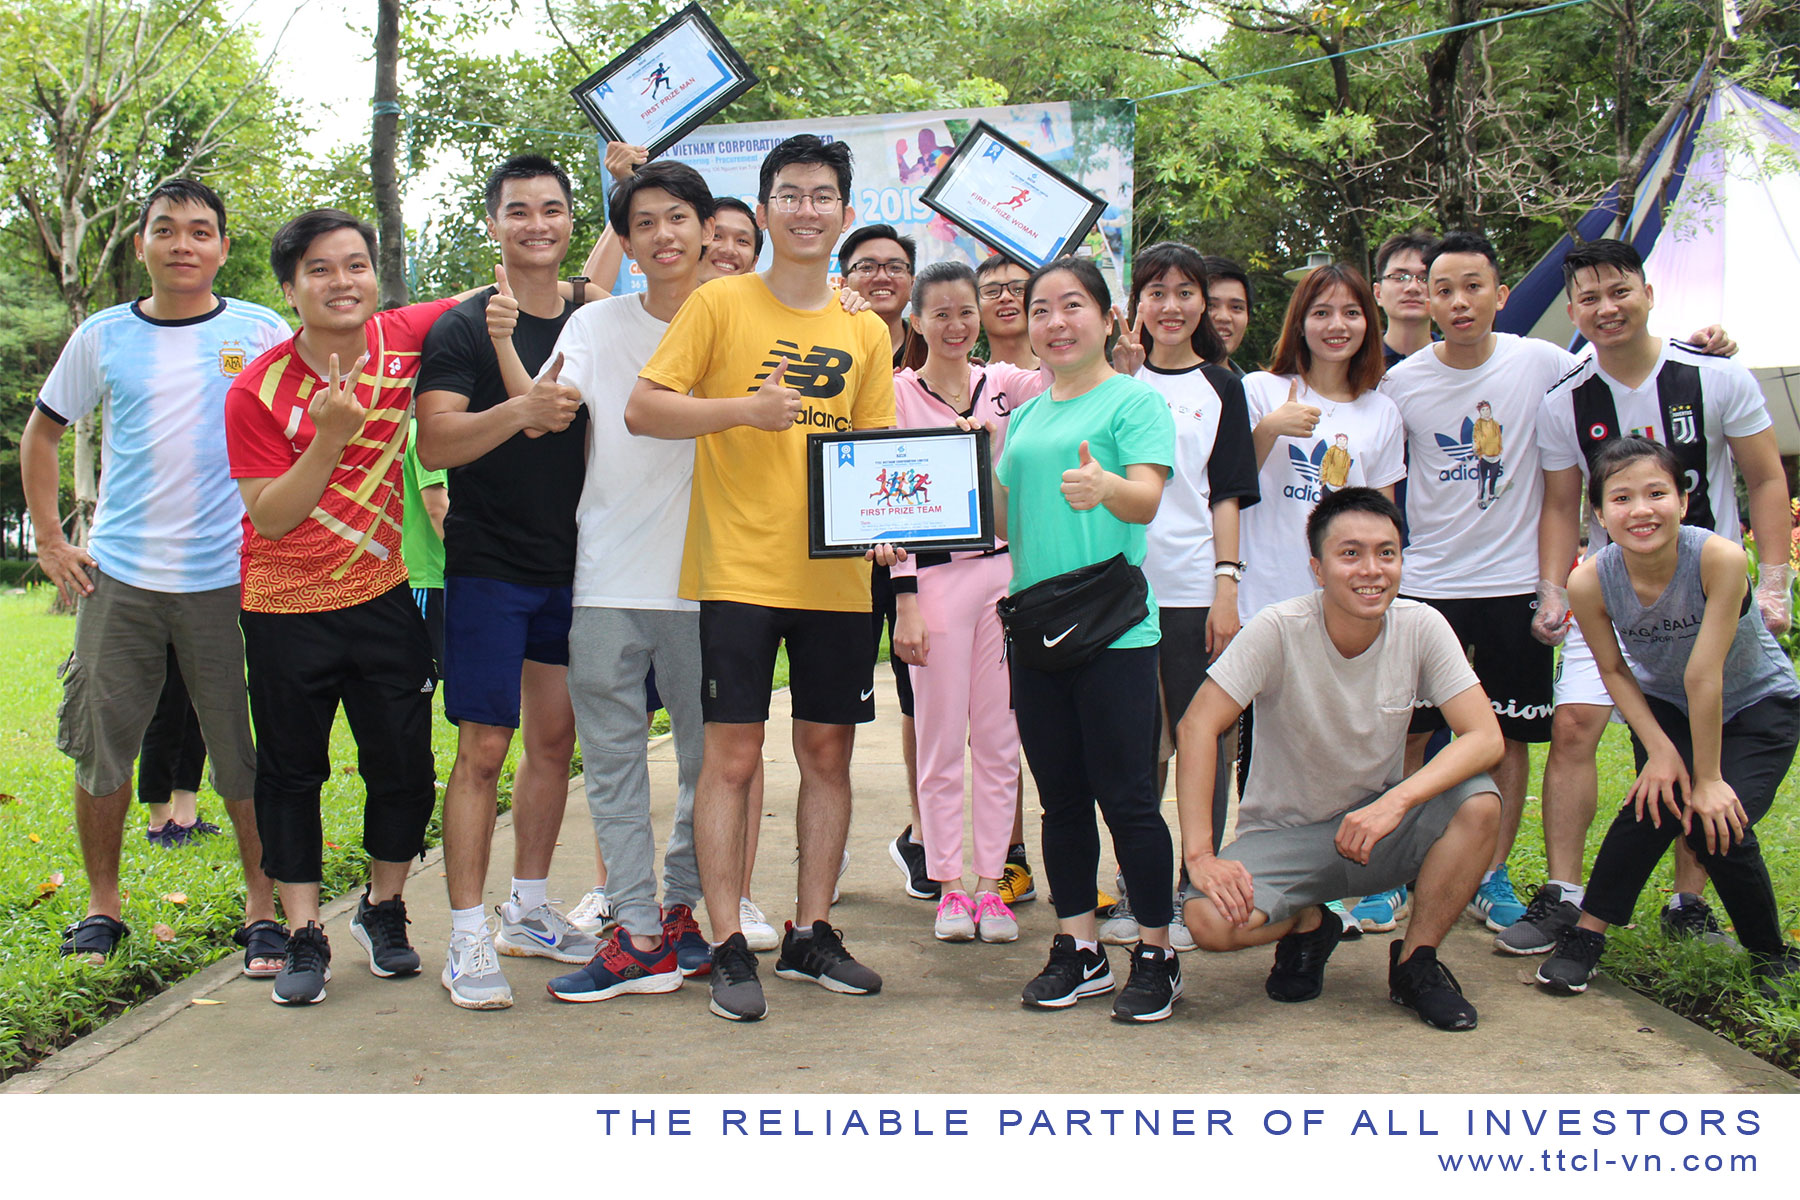 TVC Company organized mid – Autumn festival for children and a marathon race for their employess